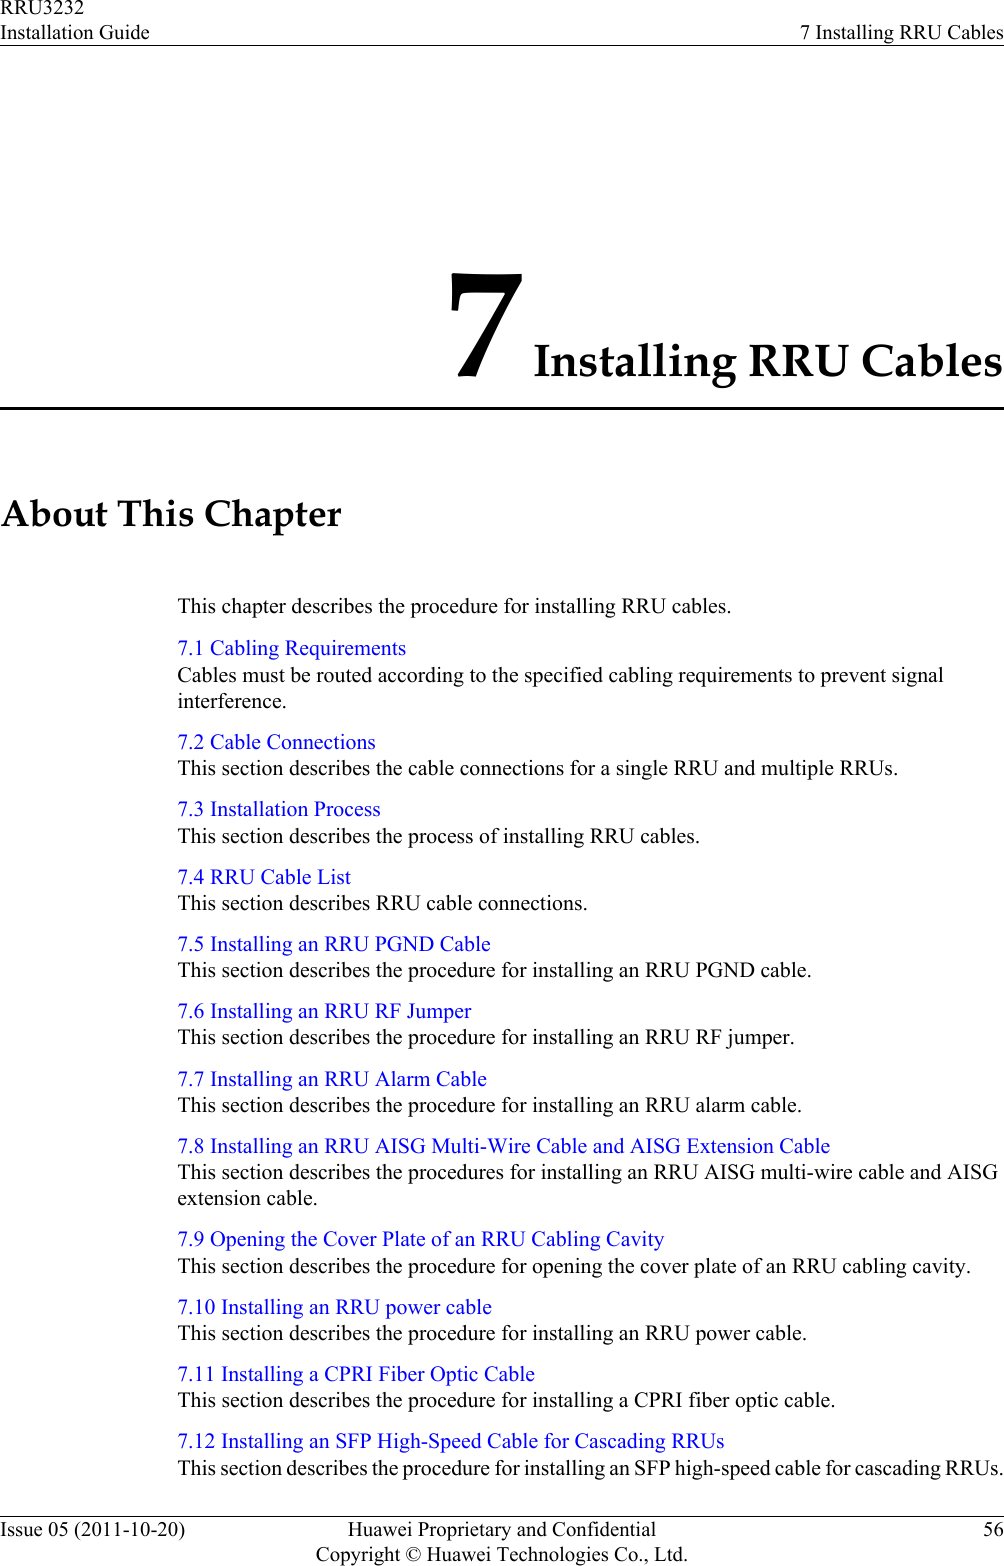 7 Installing RRU CablesAbout This ChapterThis chapter describes the procedure for installing RRU cables.7.1 Cabling RequirementsCables must be routed according to the specified cabling requirements to prevent signalinterference.7.2 Cable ConnectionsThis section describes the cable connections for a single RRU and multiple RRUs.7.3 Installation ProcessThis section describes the process of installing RRU cables.7.4 RRU Cable ListThis section describes RRU cable connections.7.5 Installing an RRU PGND CableThis section describes the procedure for installing an RRU PGND cable.7.6 Installing an RRU RF JumperThis section describes the procedure for installing an RRU RF jumper.7.7 Installing an RRU Alarm CableThis section describes the procedure for installing an RRU alarm cable.7.8 Installing an RRU AISG Multi-Wire Cable and AISG Extension CableThis section describes the procedures for installing an RRU AISG multi-wire cable and AISGextension cable.7.9 Opening the Cover Plate of an RRU Cabling CavityThis section describes the procedure for opening the cover plate of an RRU cabling cavity.7.10 Installing an RRU power cableThis section describes the procedure for installing an RRU power cable.7.11 Installing a CPRI Fiber Optic CableThis section describes the procedure for installing a CPRI fiber optic cable.7.12 Installing an SFP High-Speed Cable for Cascading RRUsThis section describes the procedure for installing an SFP high-speed cable for cascading RRUs.RRU3232Installation Guide 7 Installing RRU CablesIssue 05 (2011-10-20) Huawei Proprietary and ConfidentialCopyright © Huawei Technologies Co., Ltd.56